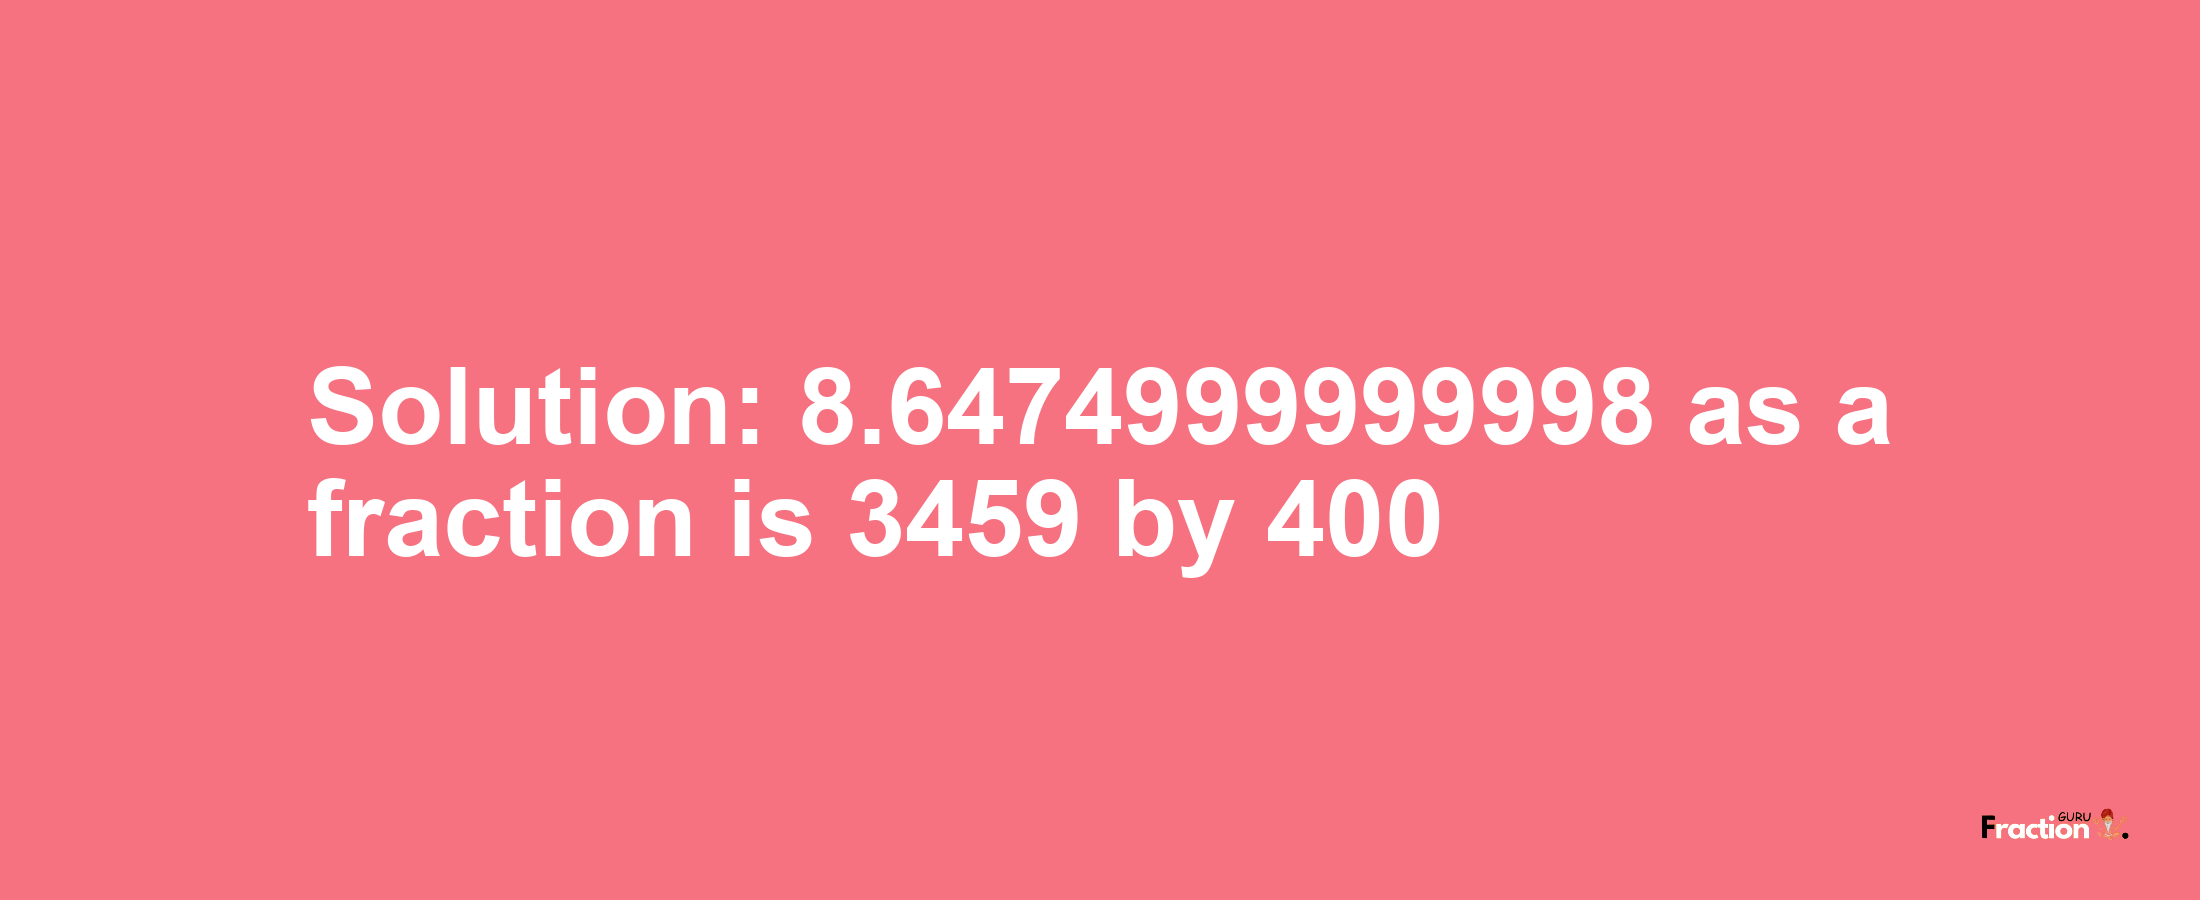 Solution:8.6474999999998 as a fraction is 3459/400